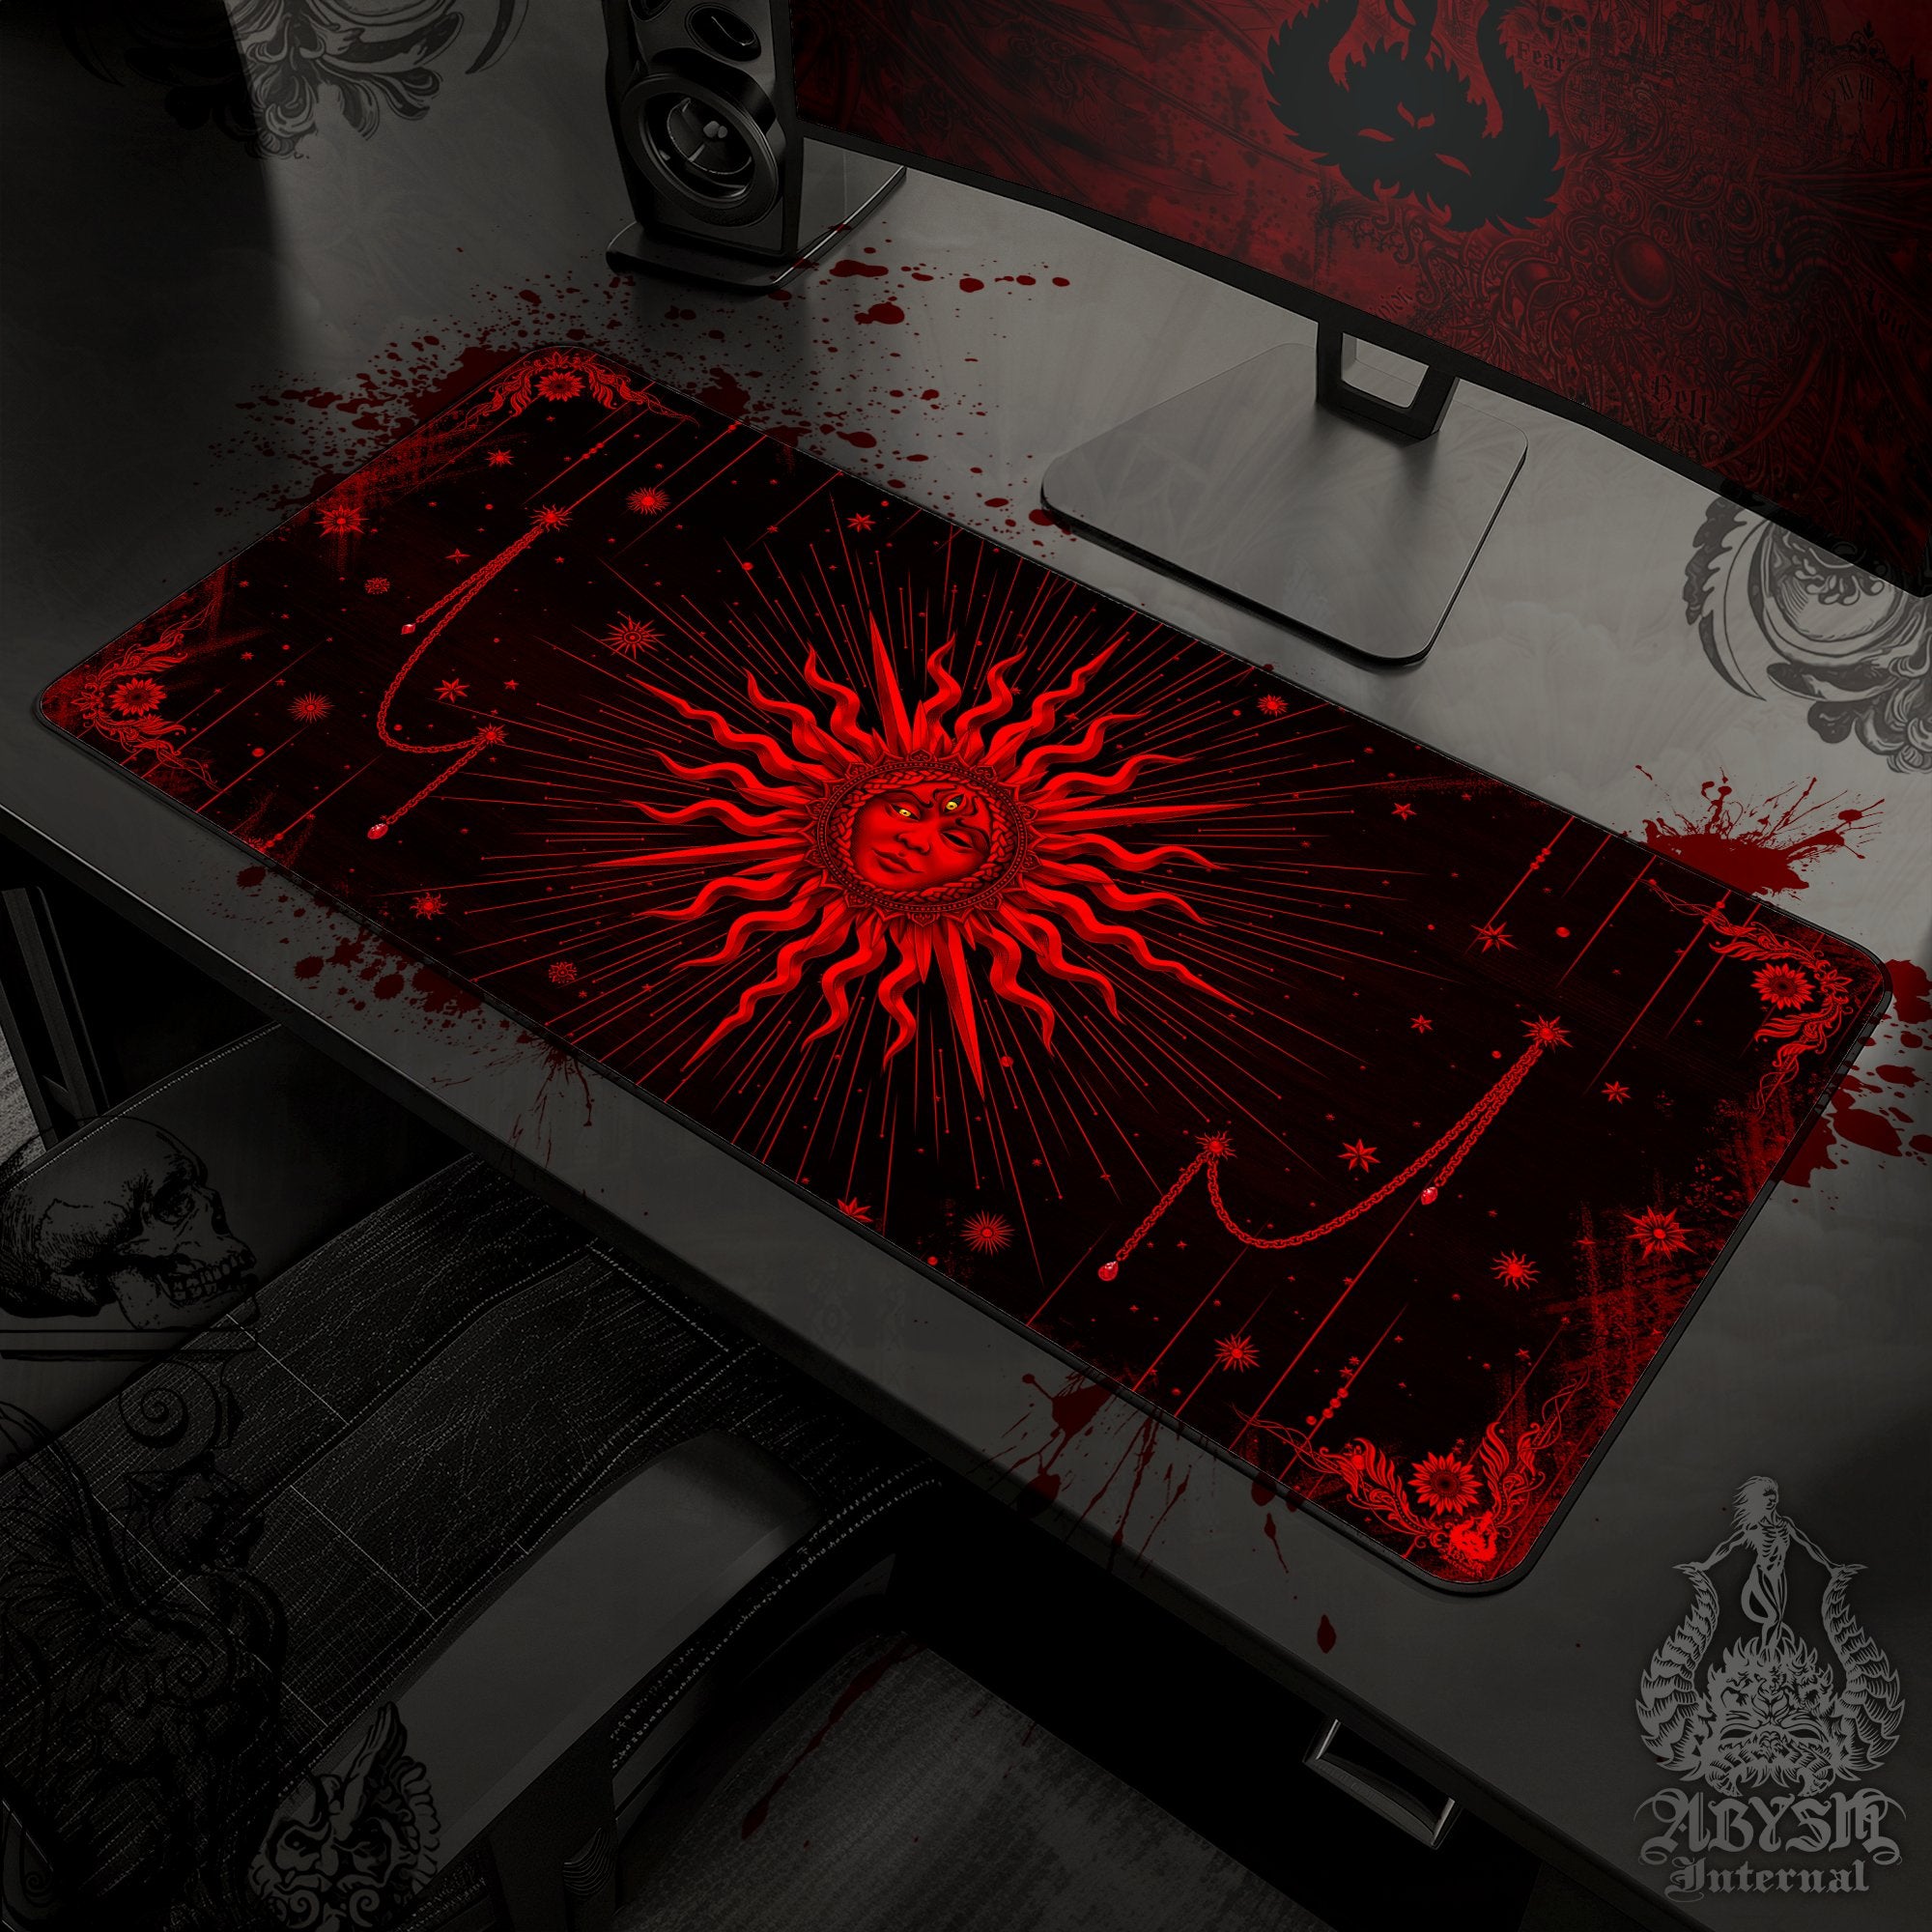 Gothic Gaming Mouse Pad, Red Sun Desk Mat, Goth Tarot Arcana Table Protector Cover, Witchy Workpad, Esoteric Art Print - Black - Abysm Internal